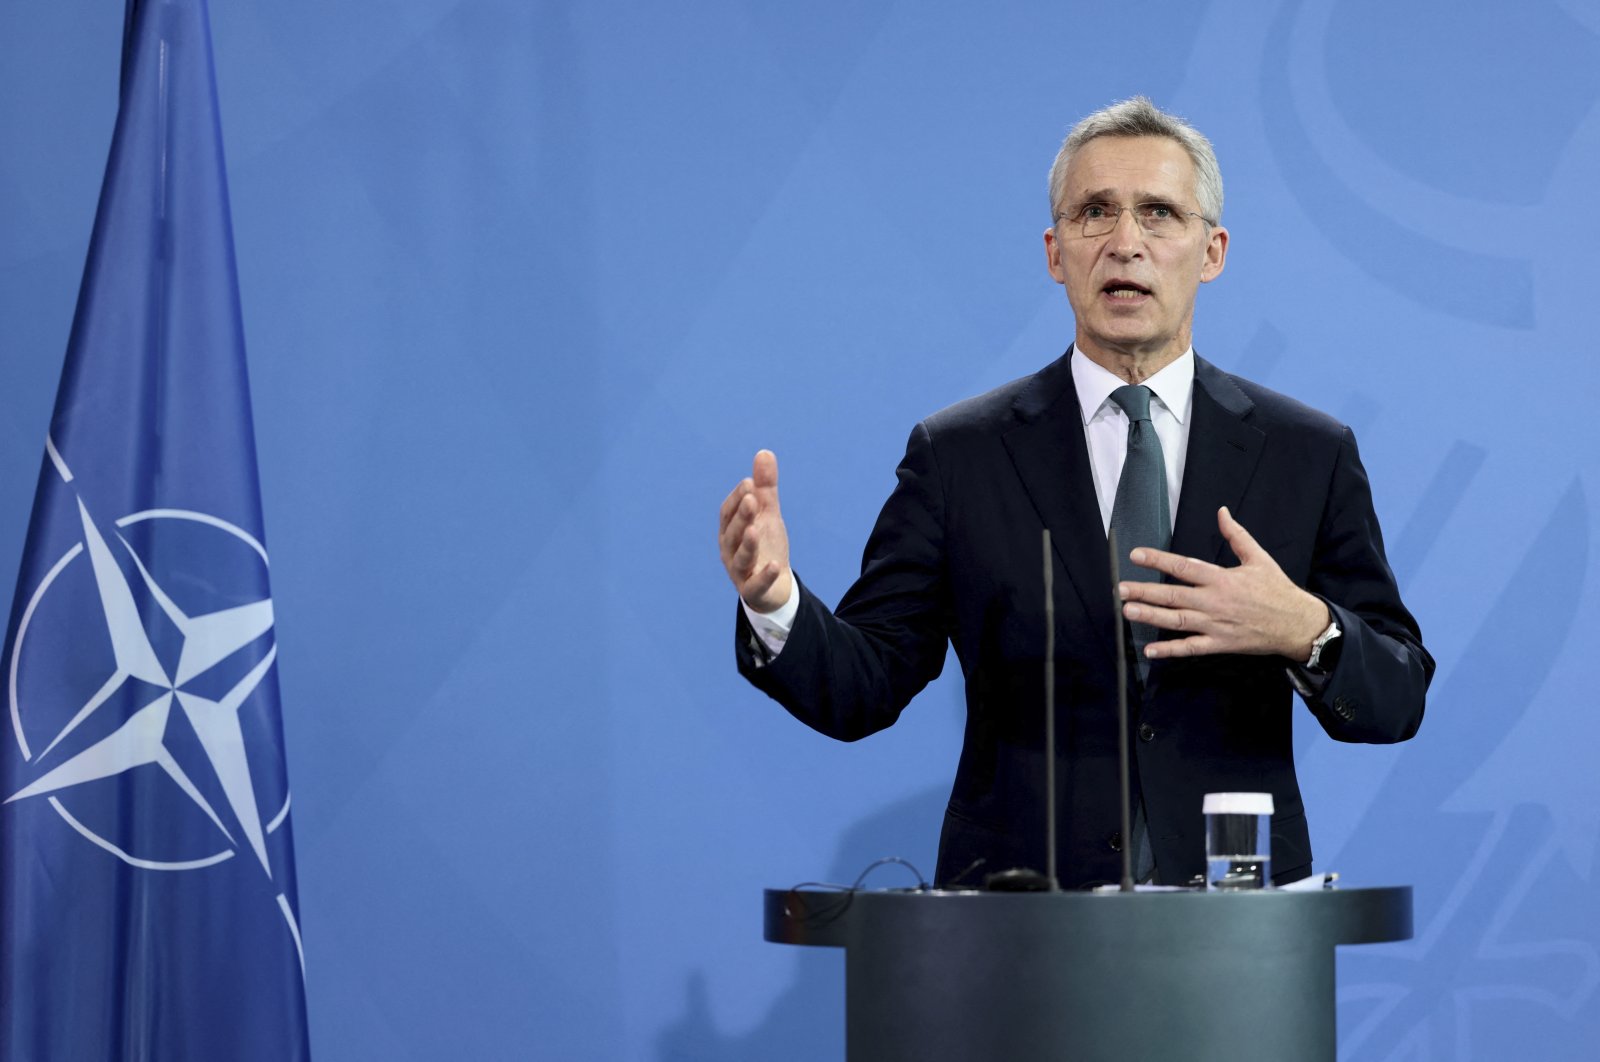 NATO Secretary General Jens Stoltenberg speaks during a news conference with German Chancellor Olaf Scholz after their talks at the Chancellery in Berlin, Germany, Jan. 18, 2022. (AP Photo)